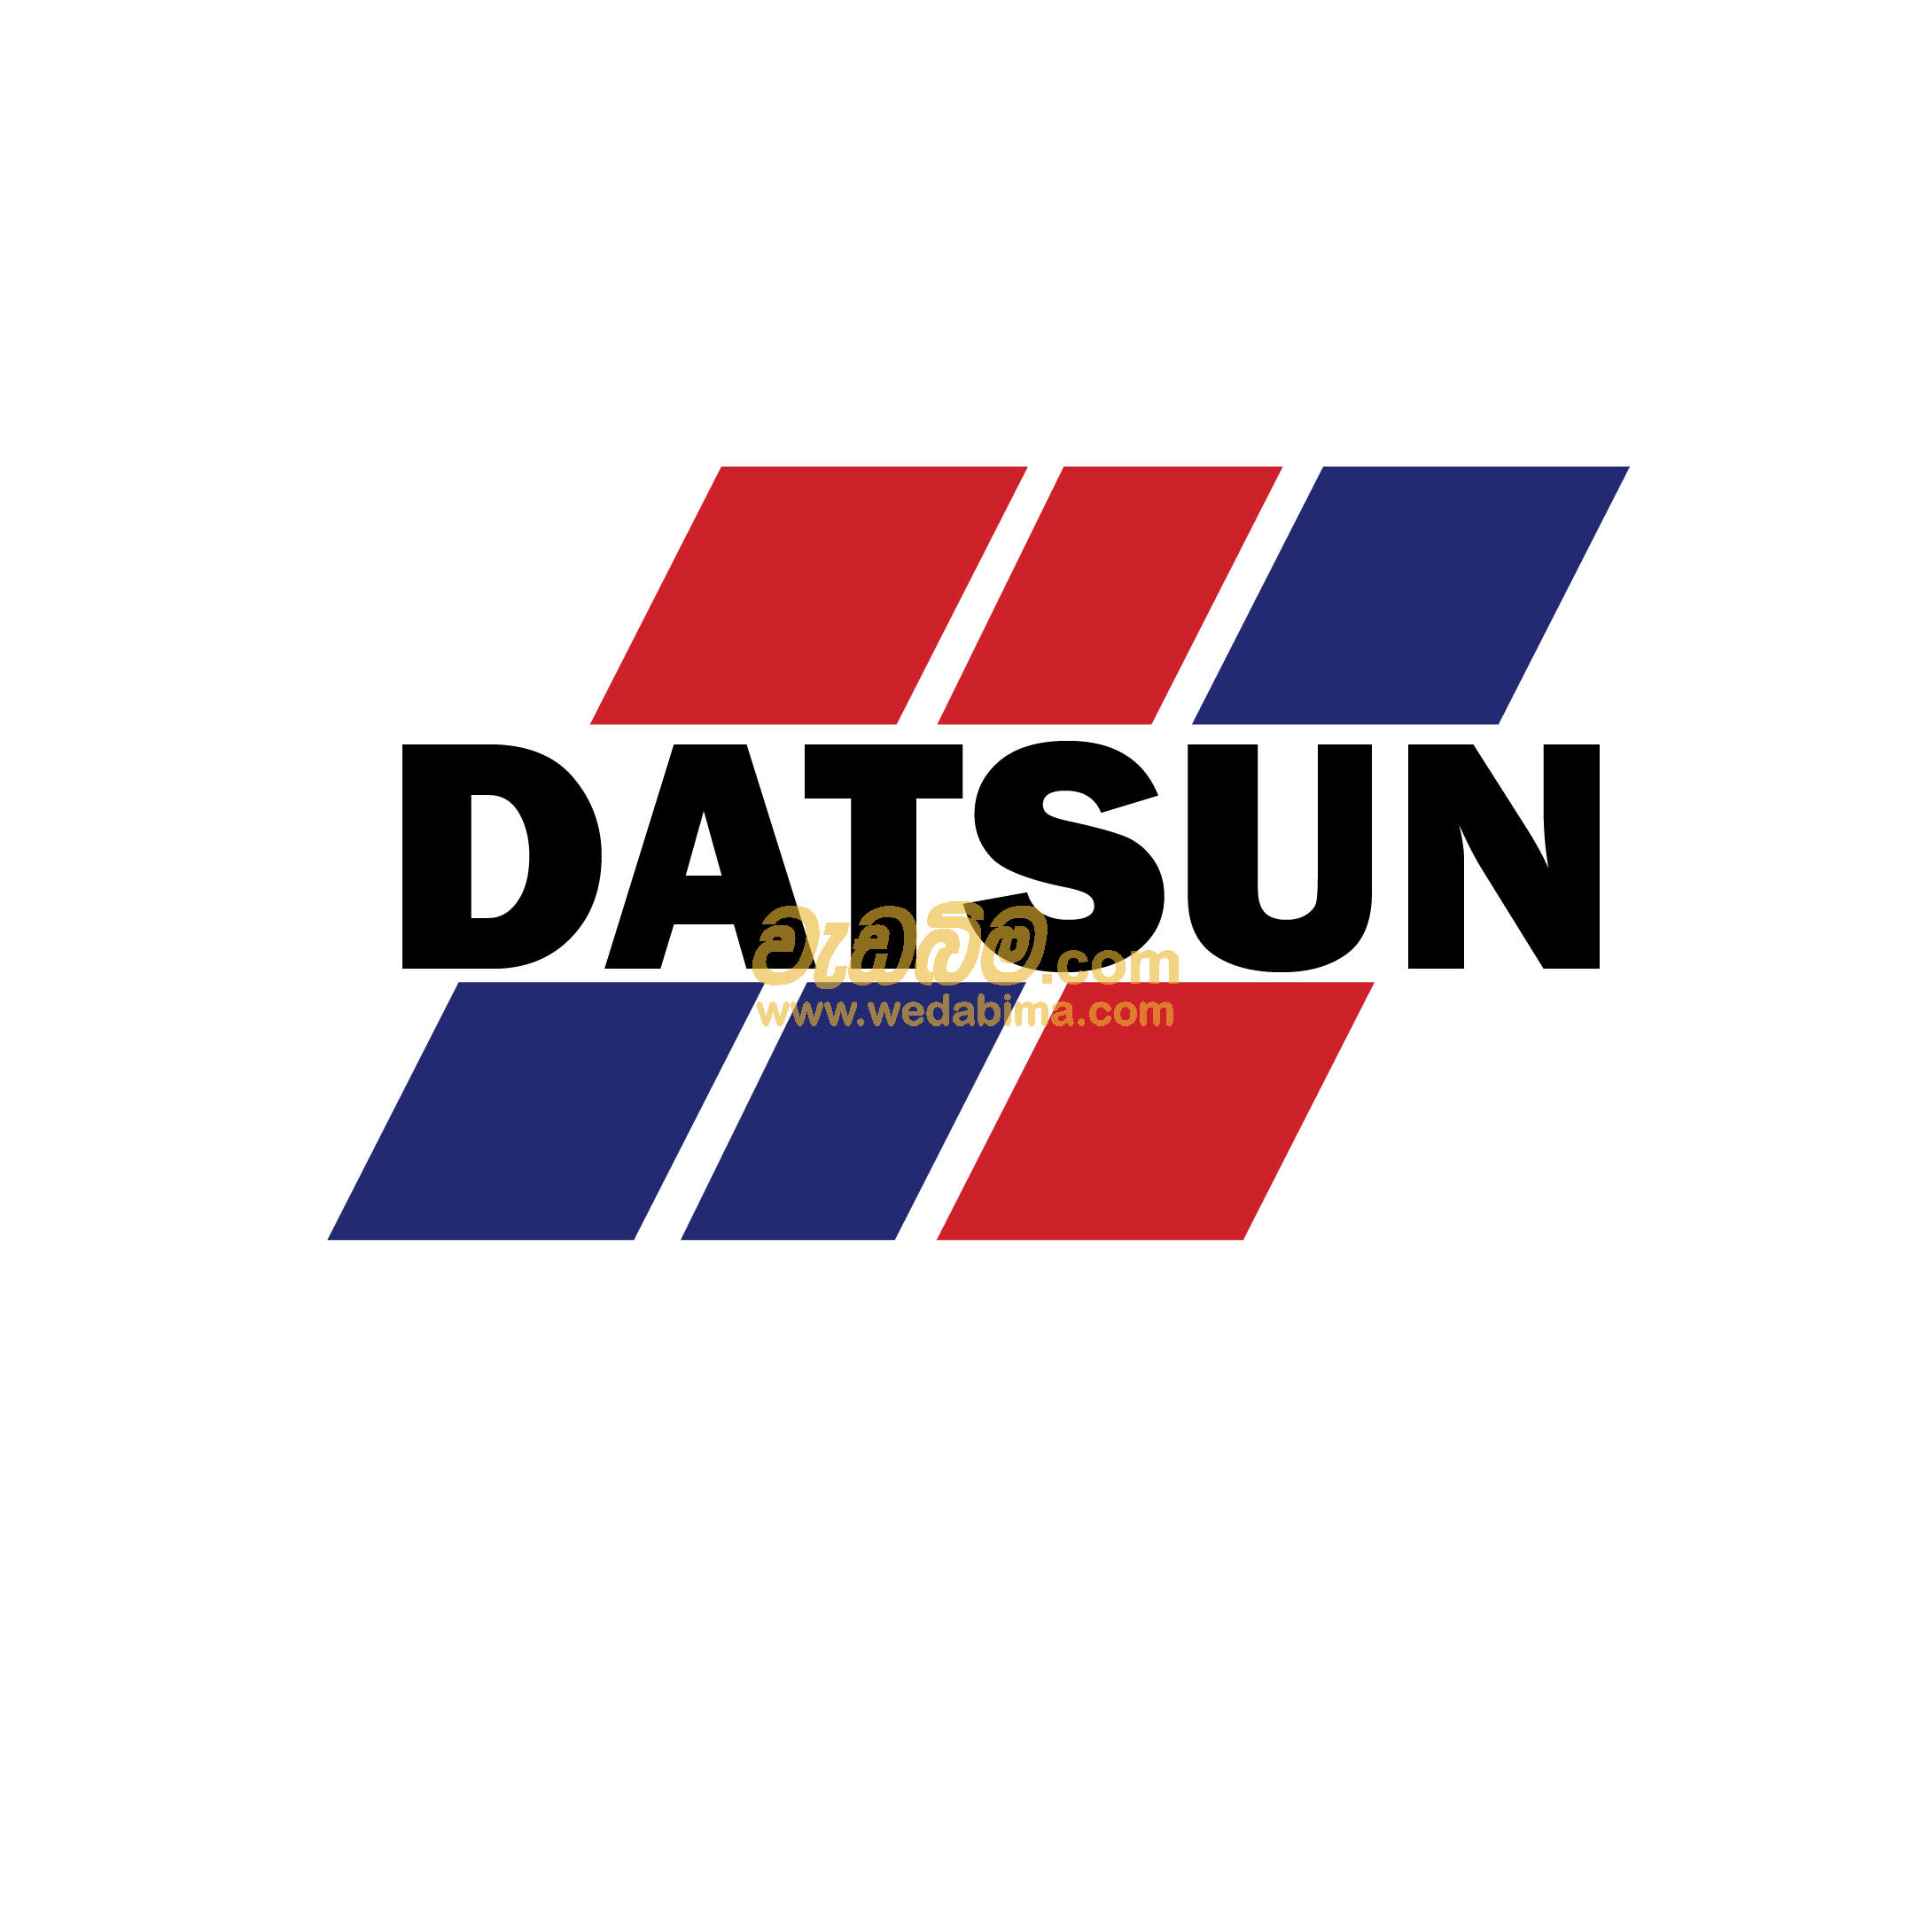 Datsun png images | PNGEgg